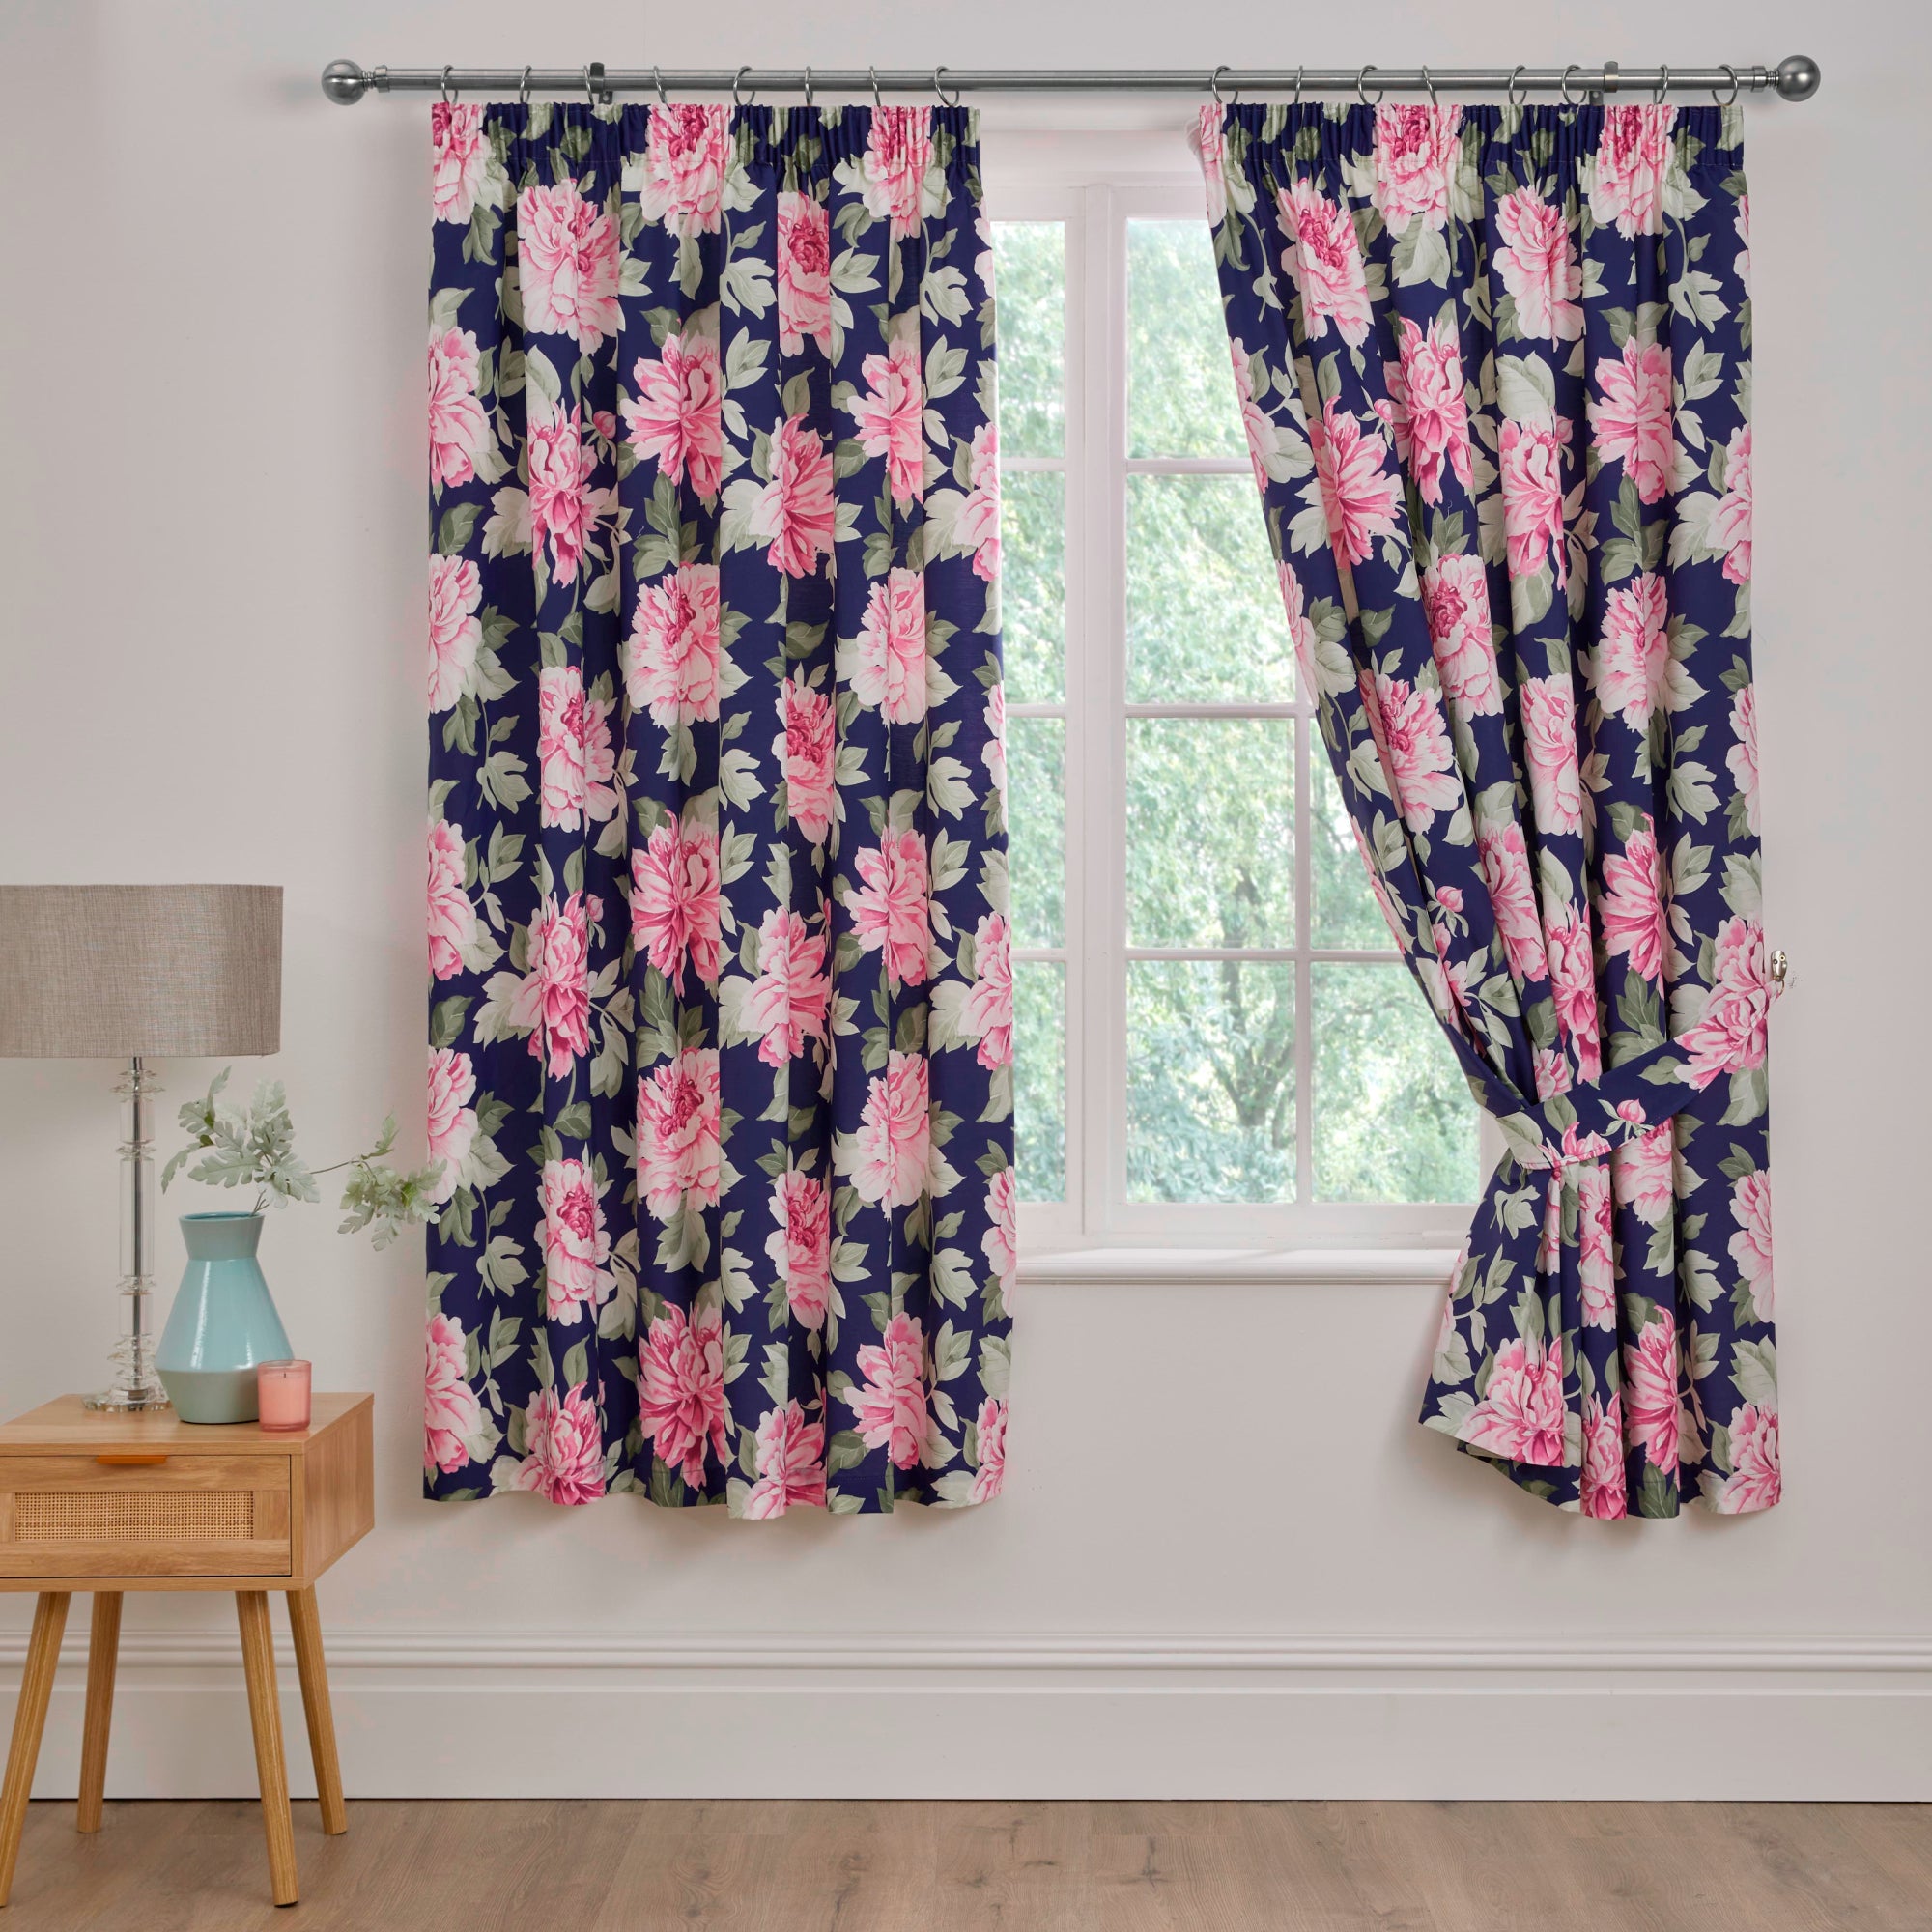 Pair of Pencil Pleat Curtains With Tie-Backs Kirsten by Dreams And Drapes Design in Pink/Blue